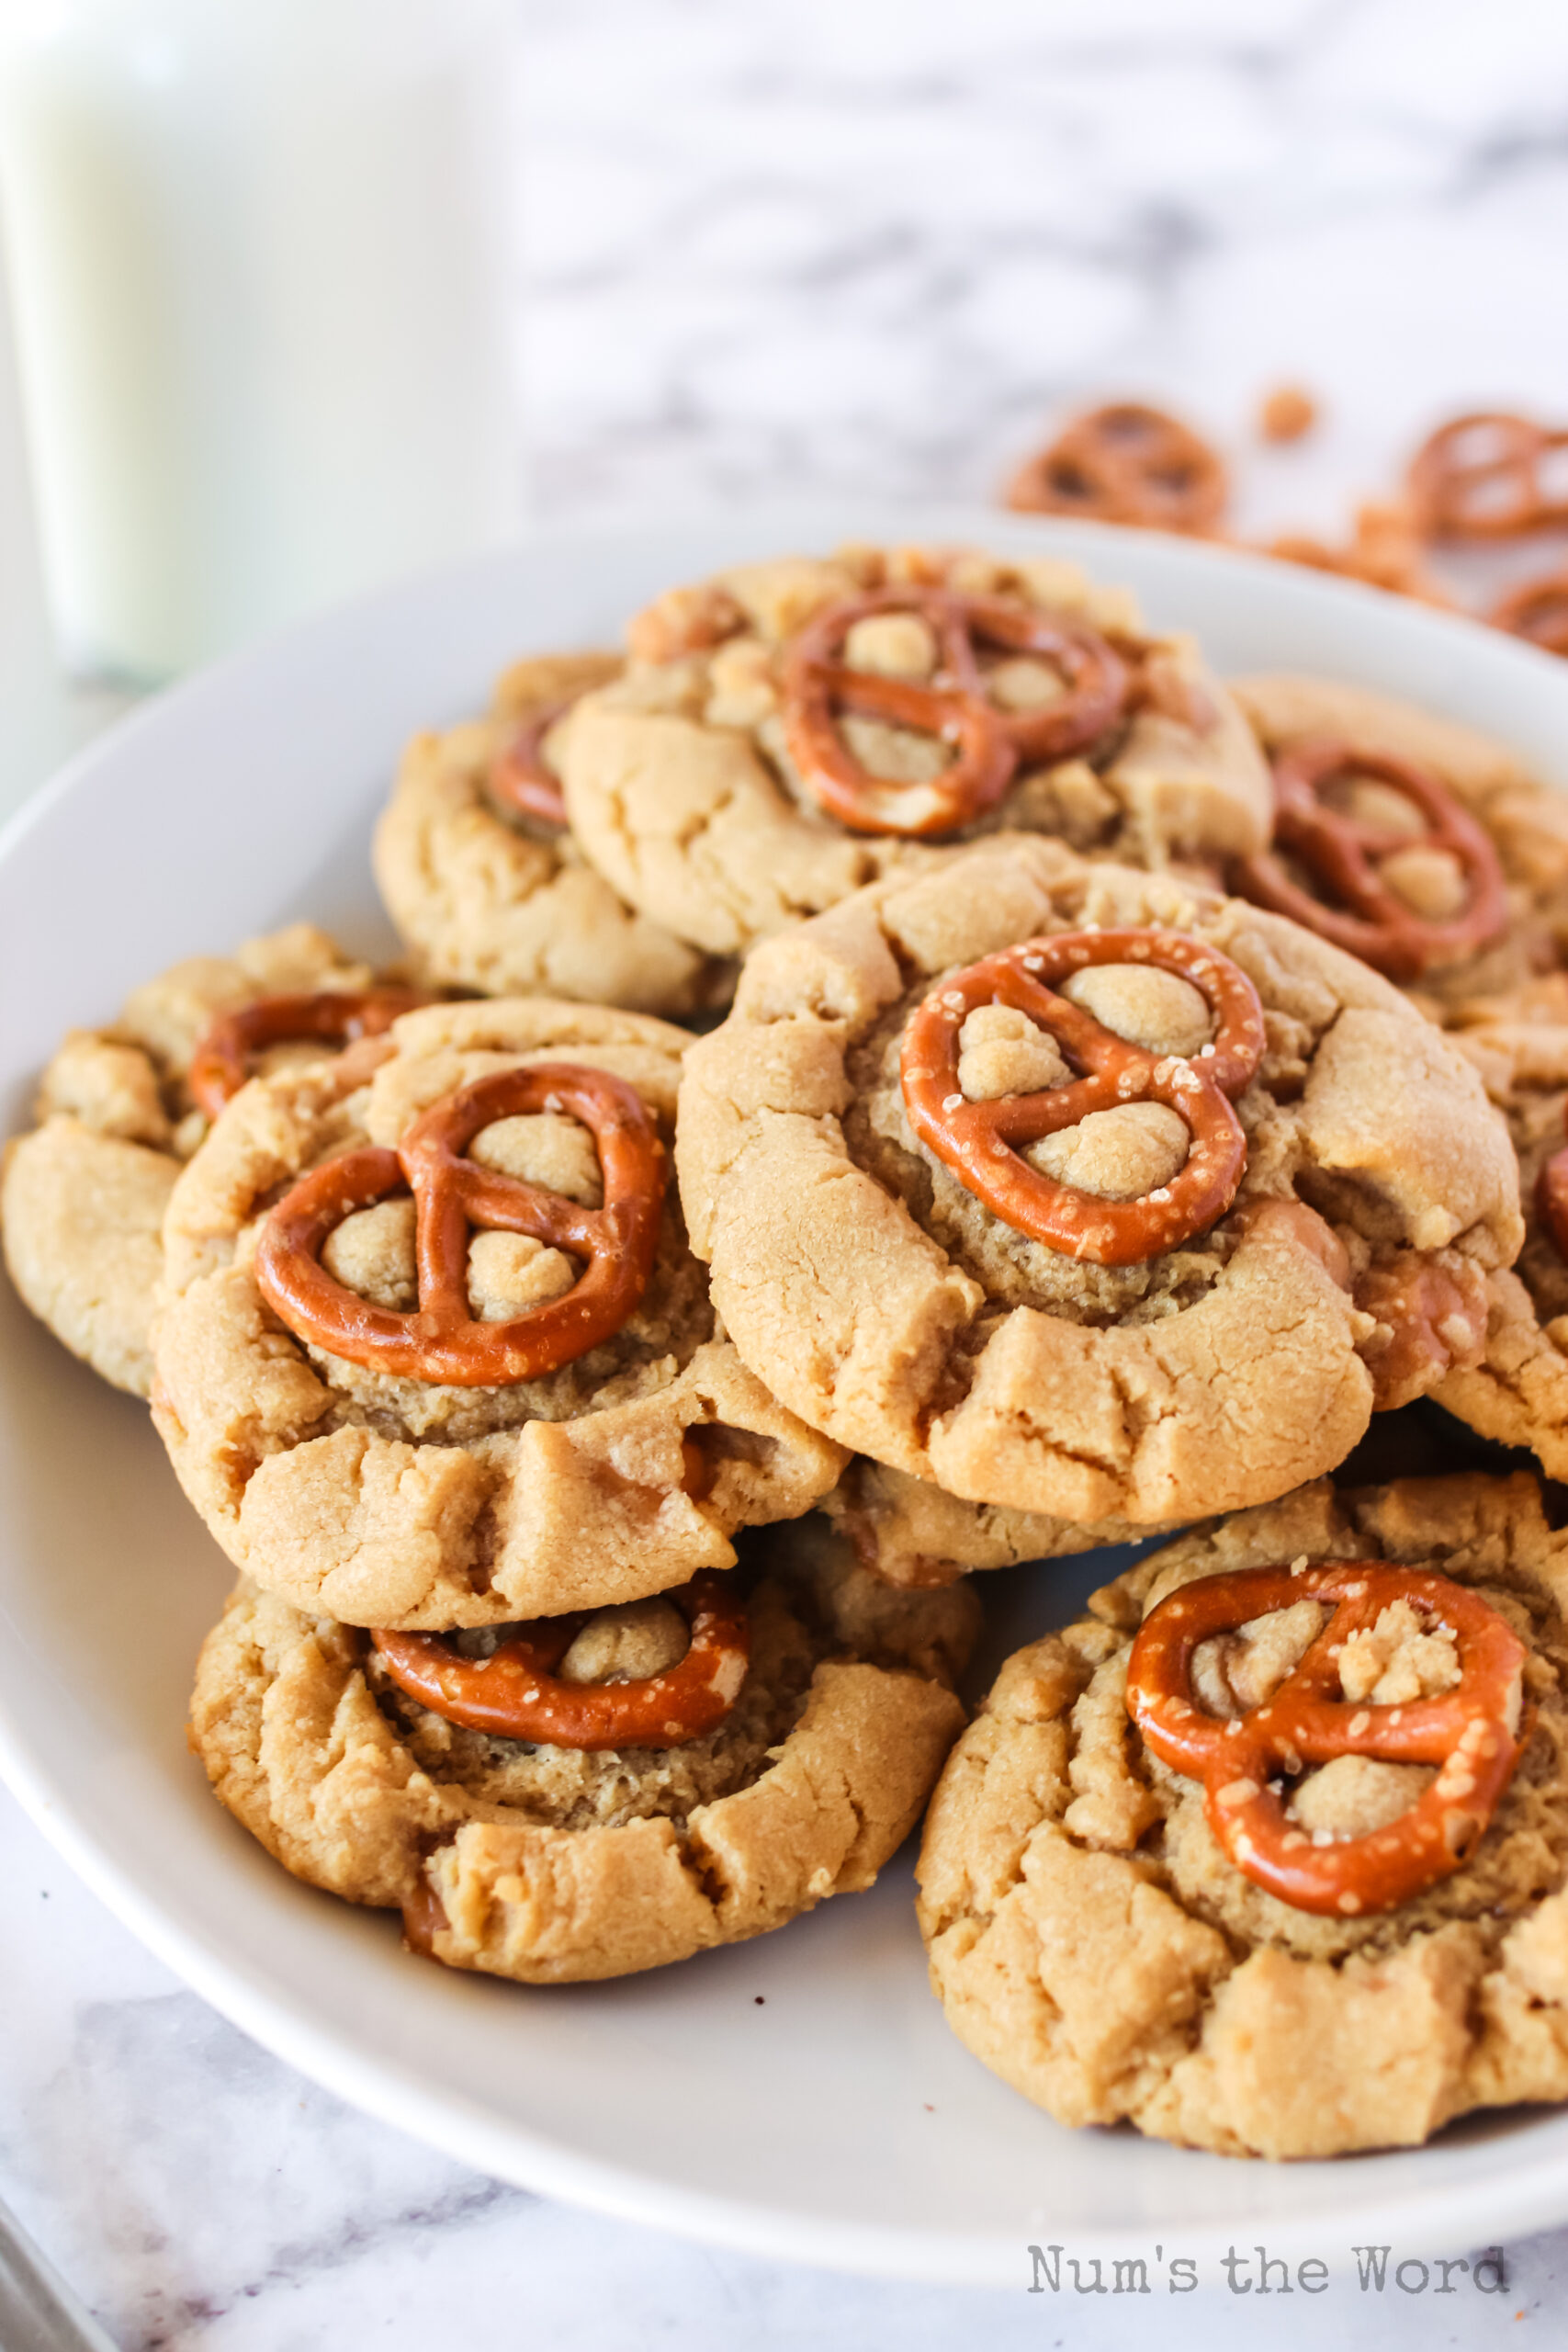 zide view of cookies on a plate